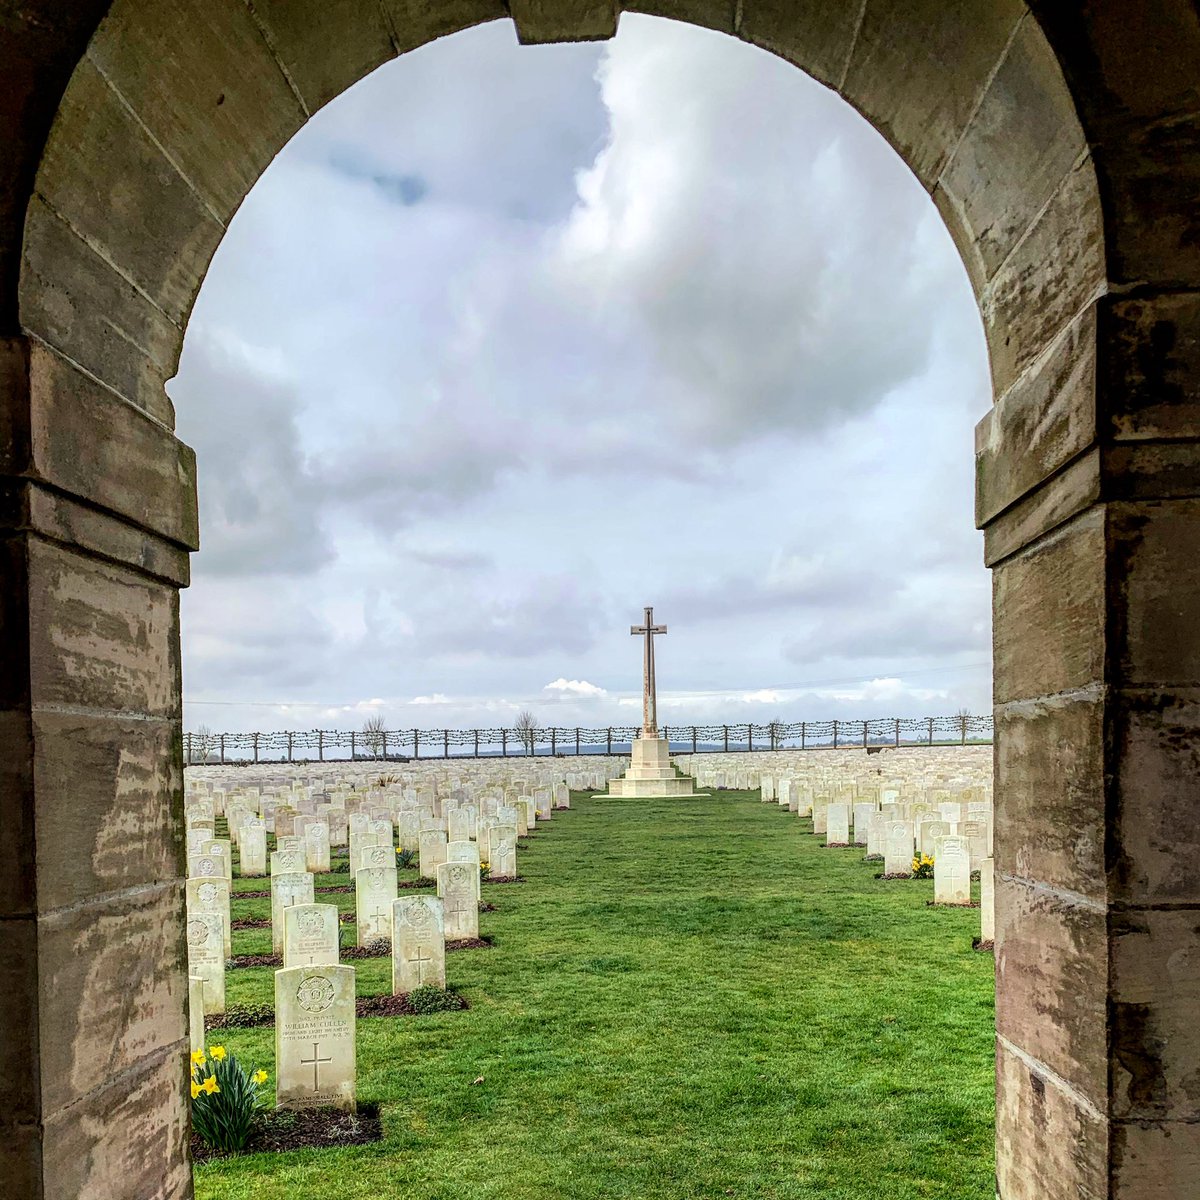 Today it is so peaceful to visit, but it utterly epitomises how sad the futility of war is; in just one generation, these very same battlefields would be fought over again with more fathers, brothers and sons never returning home to their loved ones...